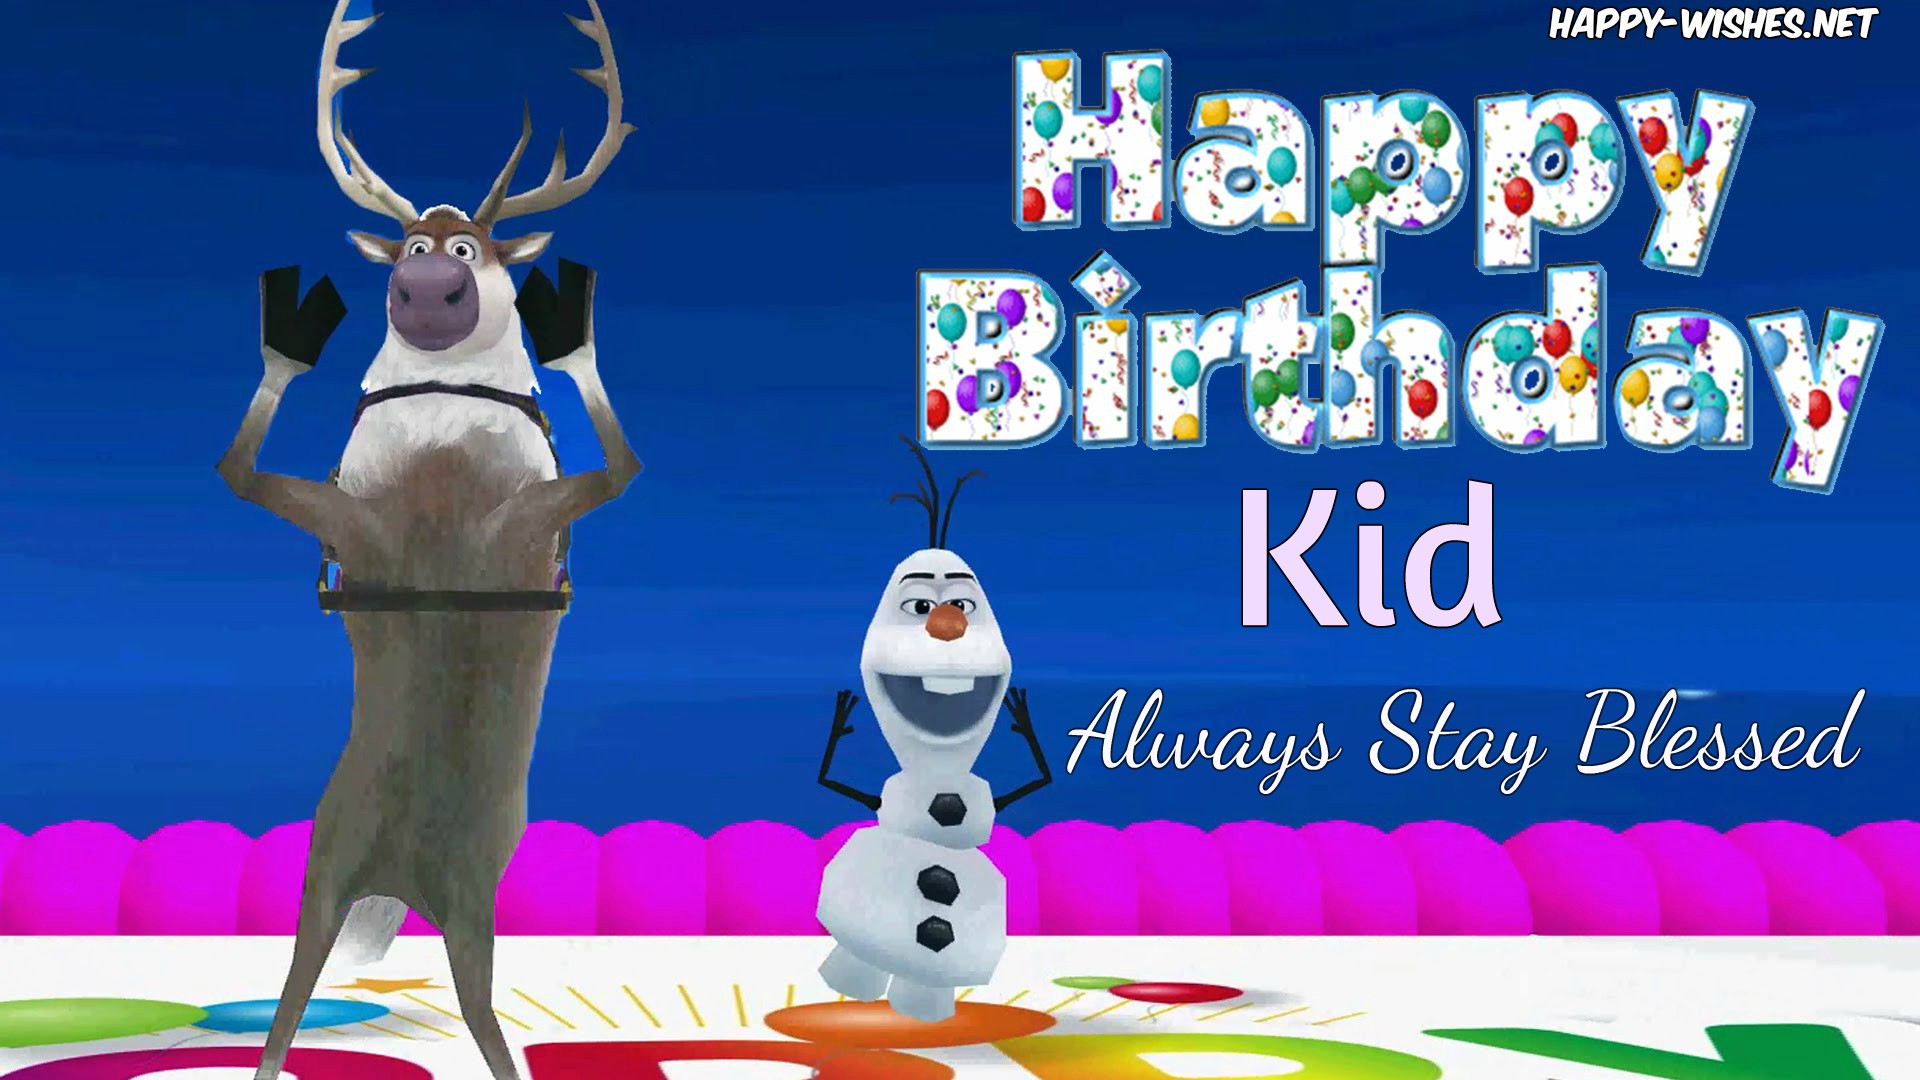 50+ Happy Birthday Wishes For Kids